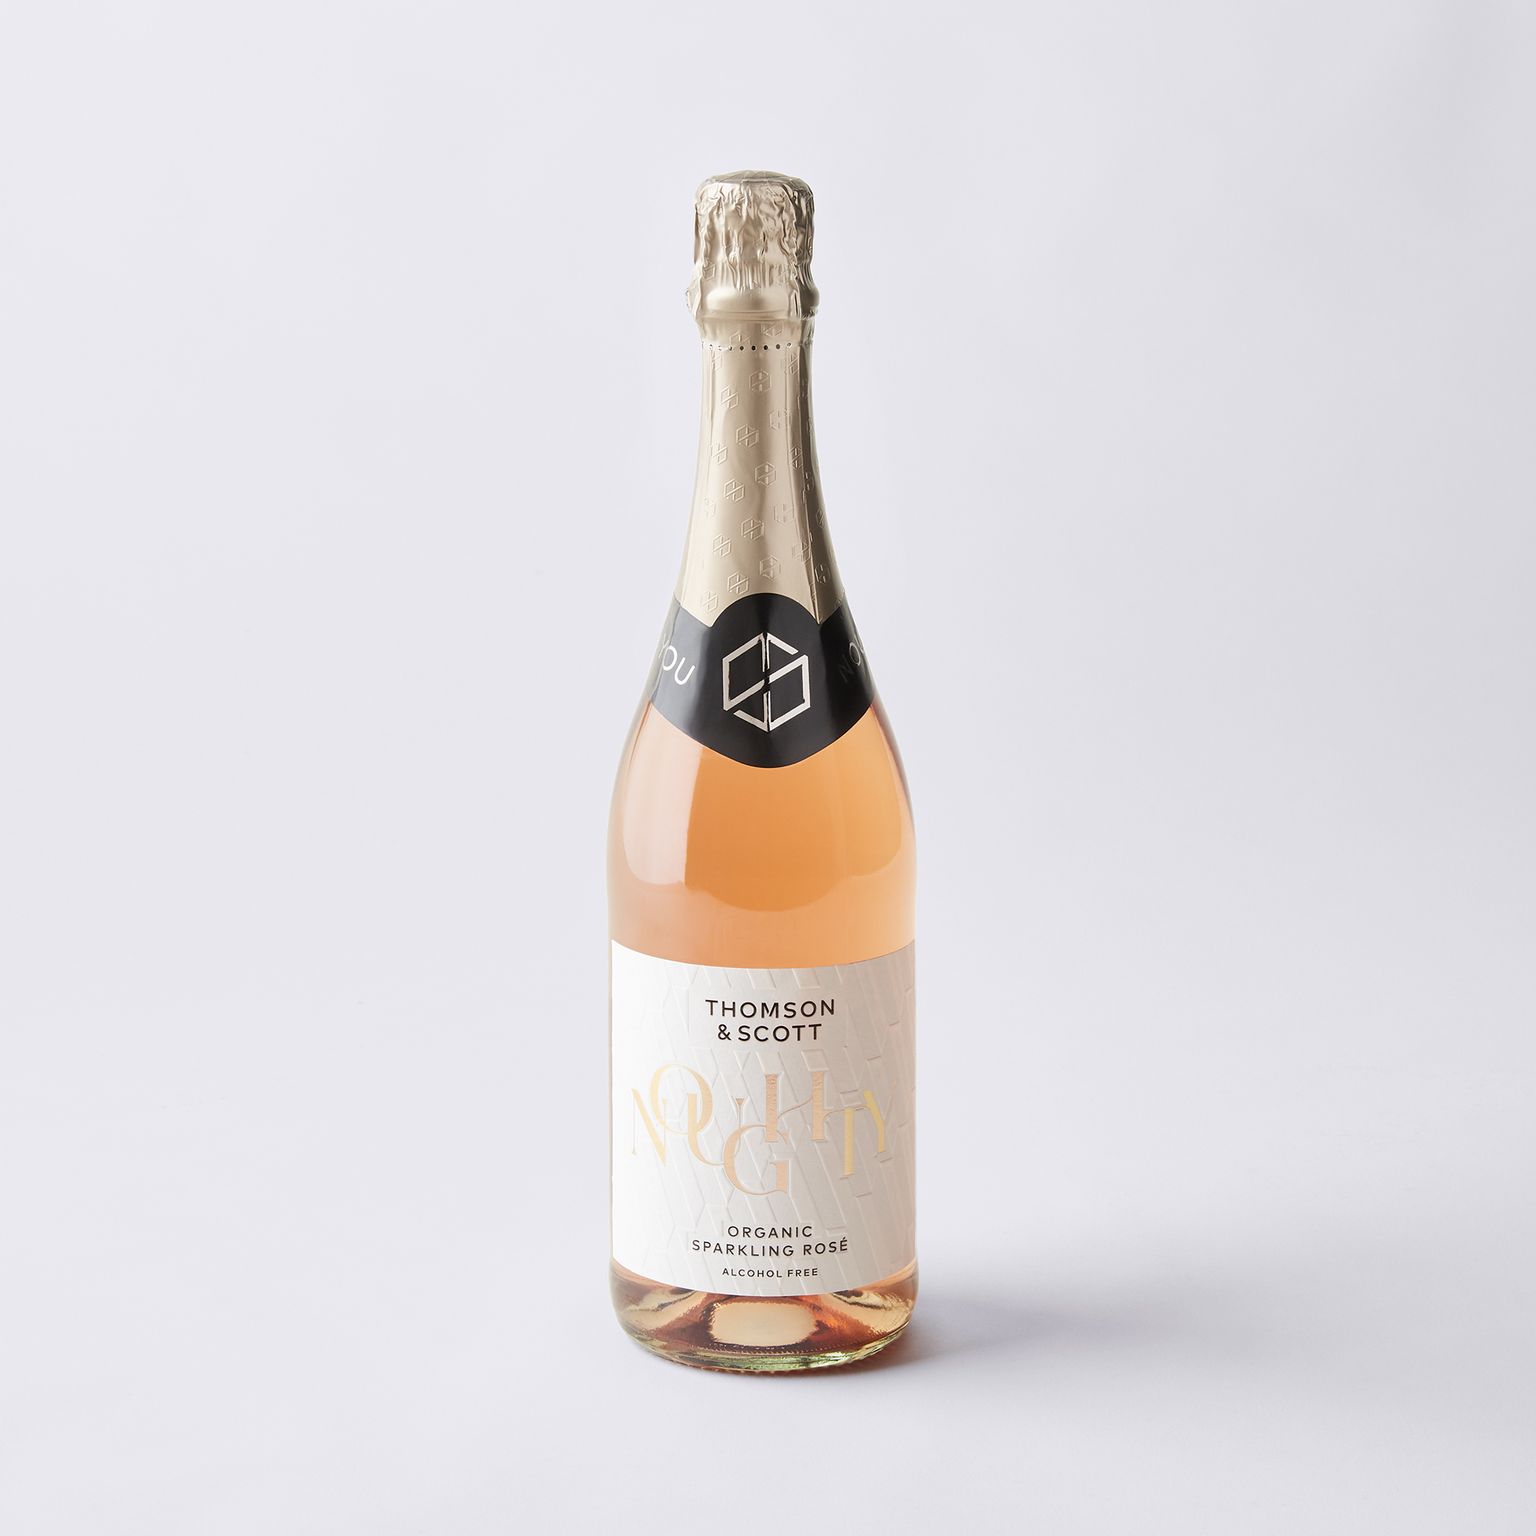 Product Image for Noughty Nonalcoholic Sparkling Rose